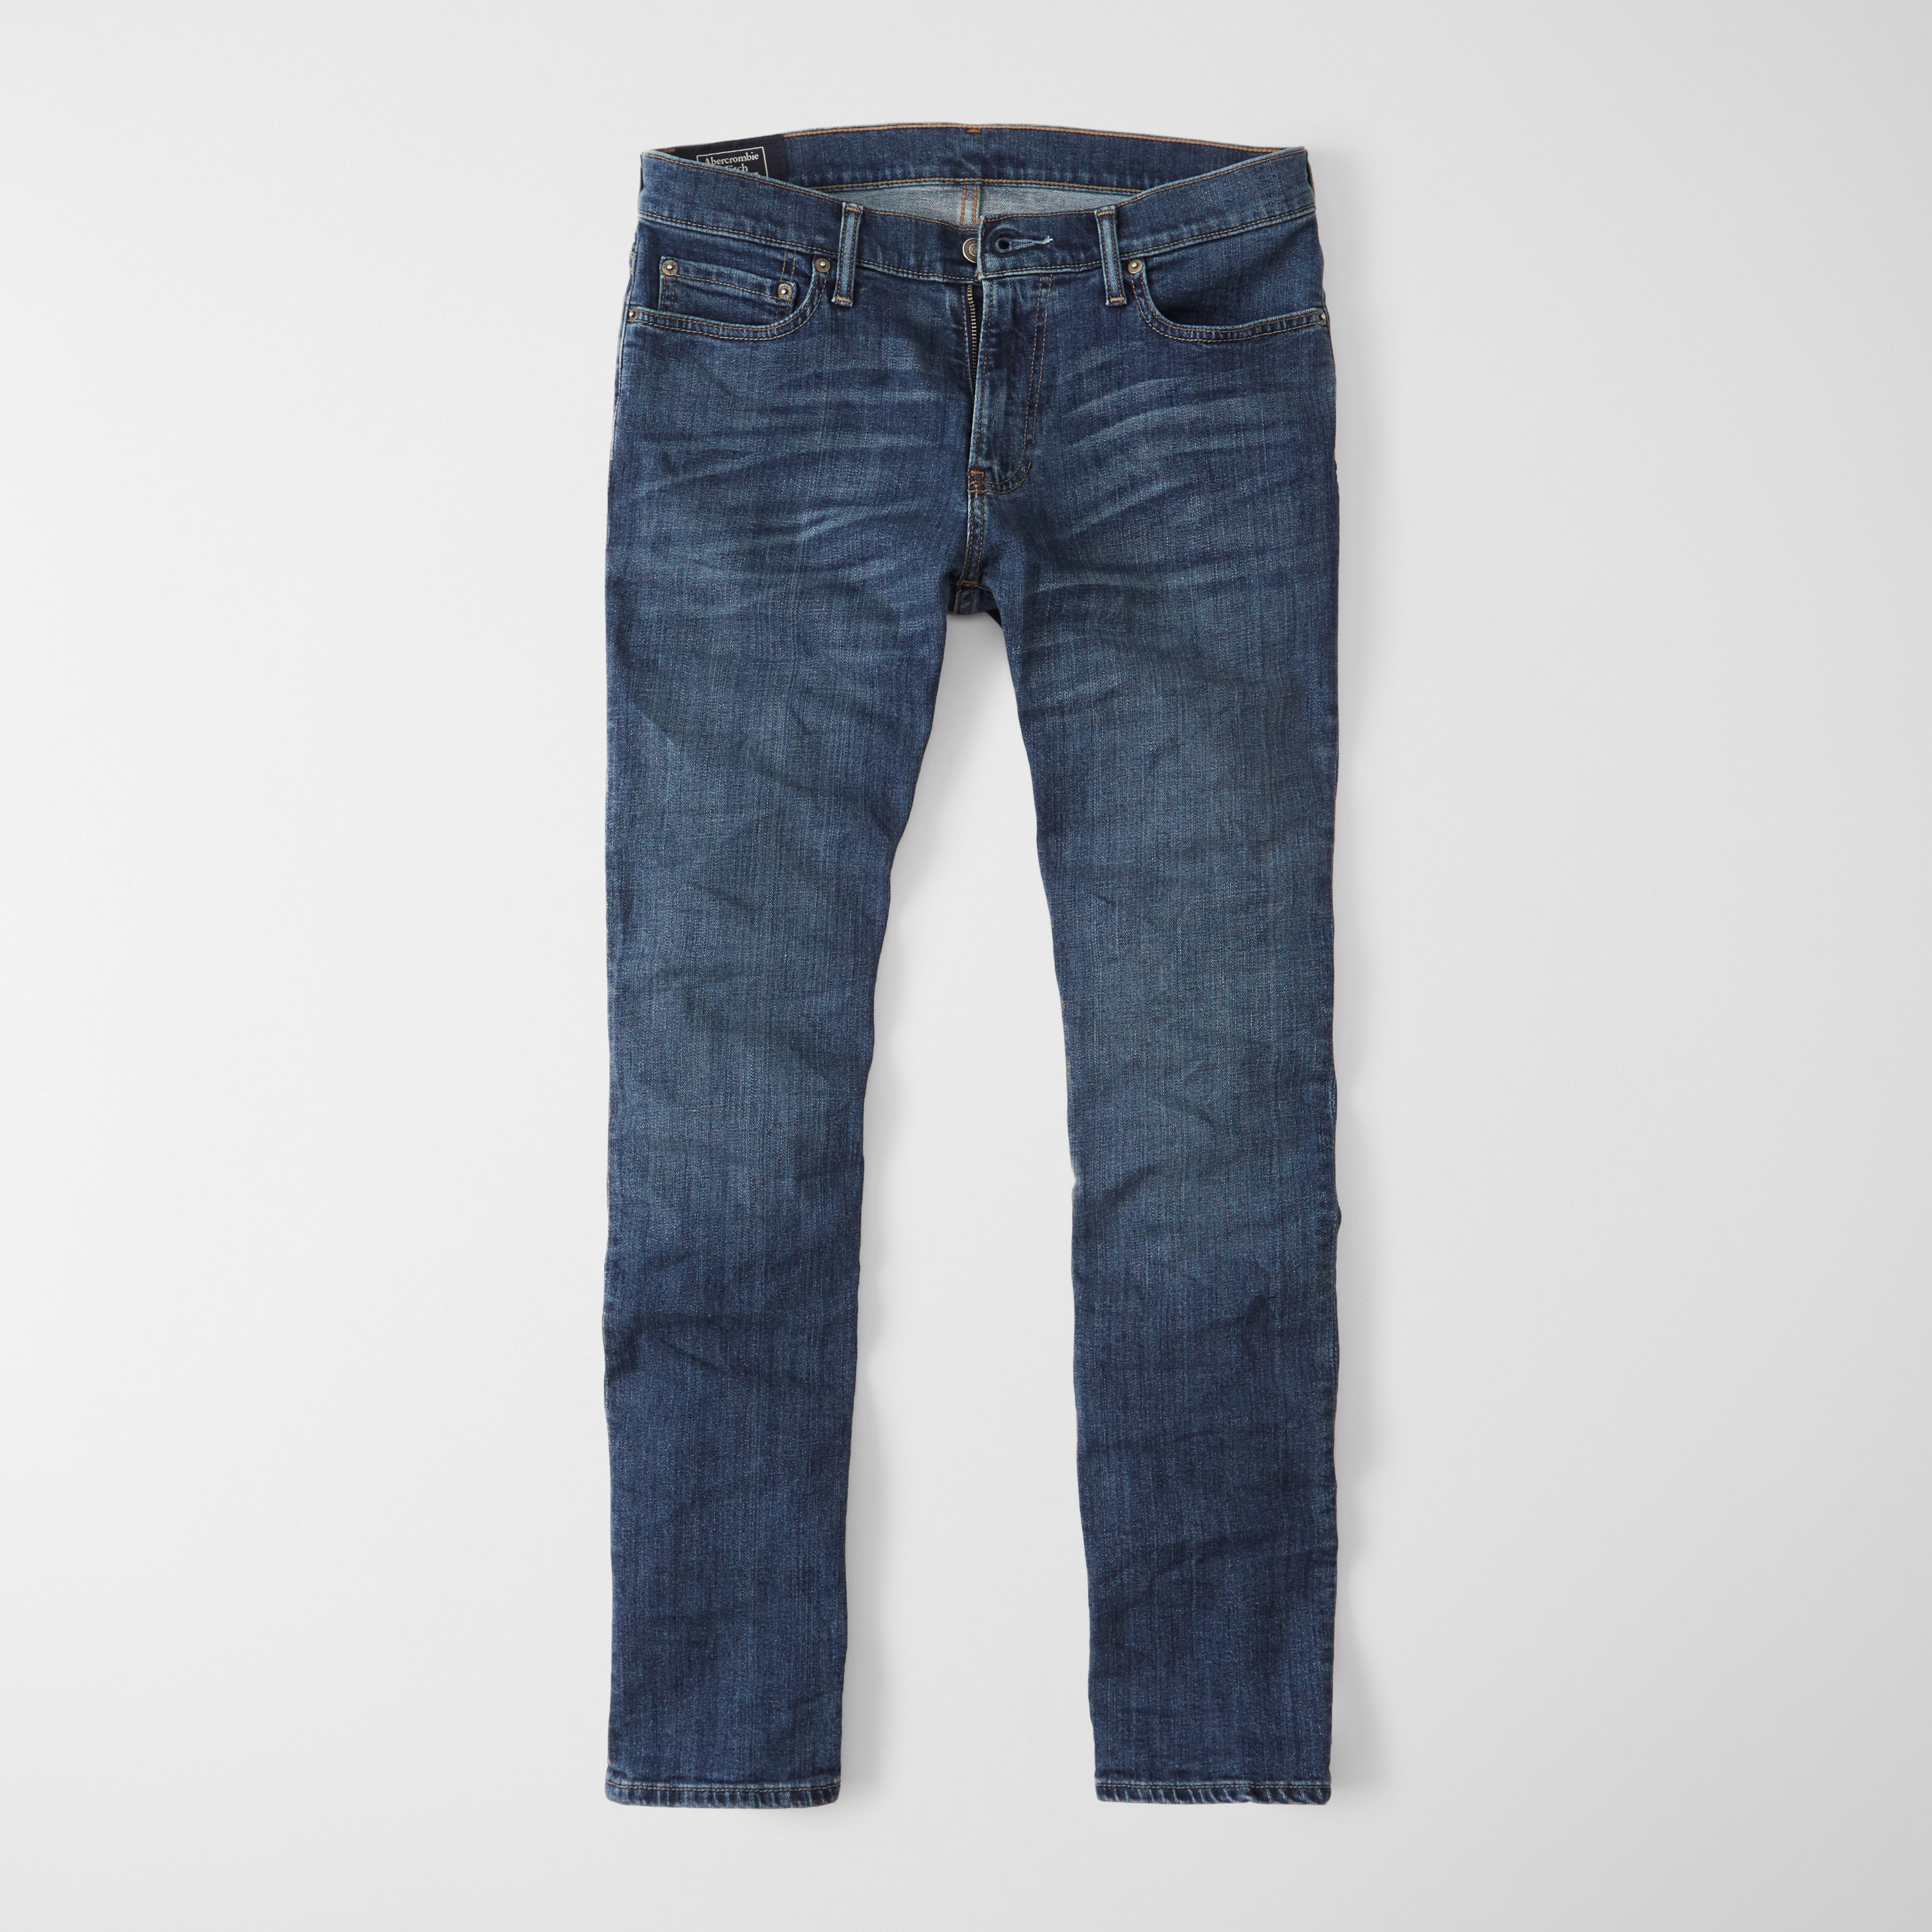 abercrombie and fitch denim